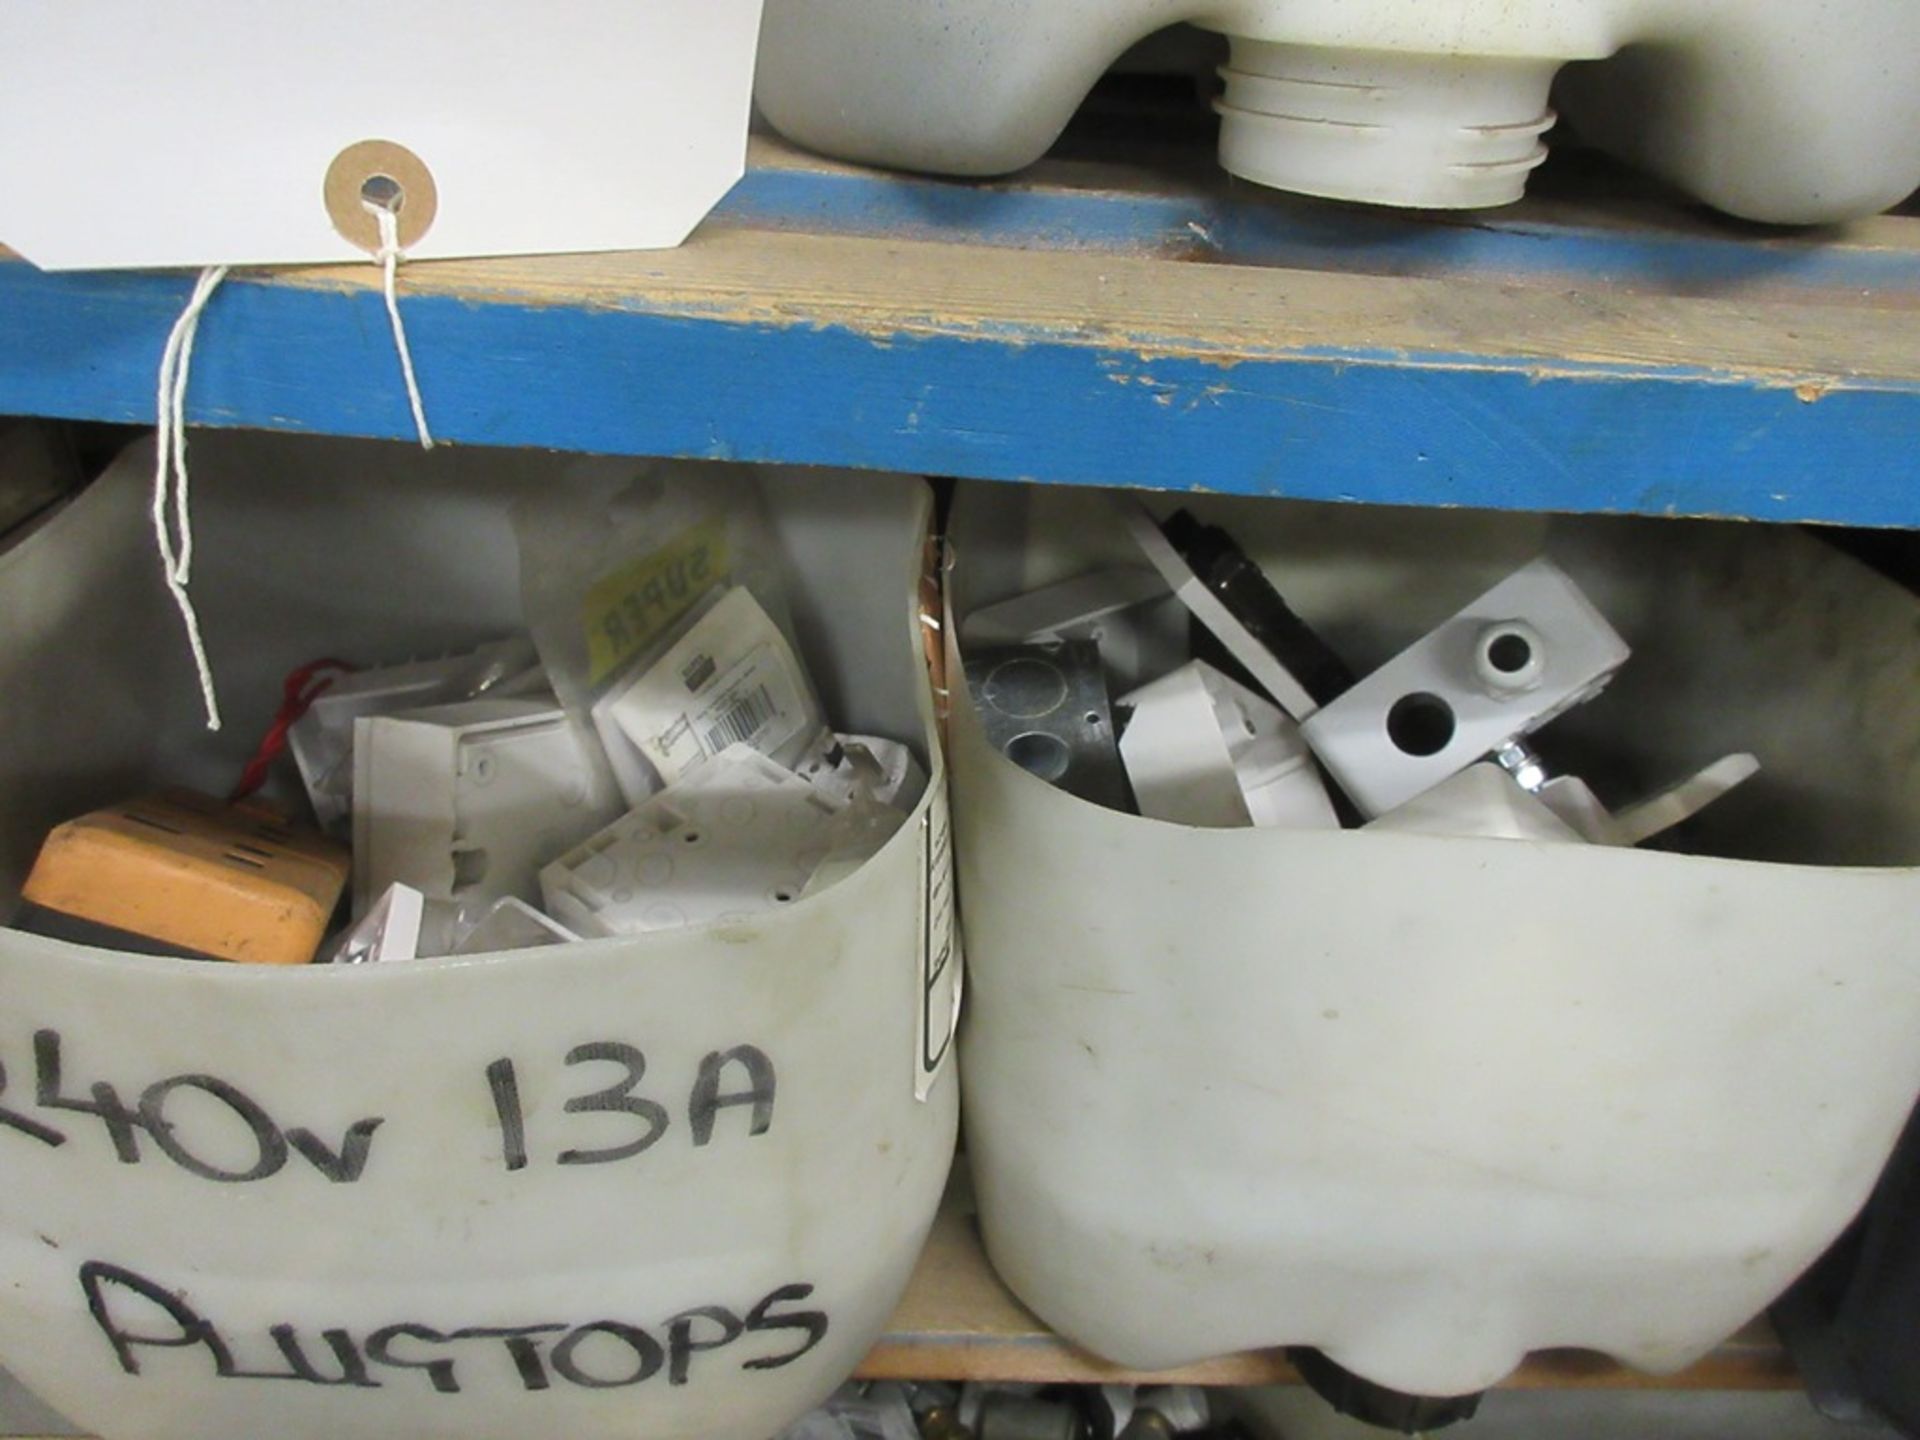 Assorted electrical stock including connectors, output modules, cable clips, flanges, fuse carriers, - Image 5 of 14